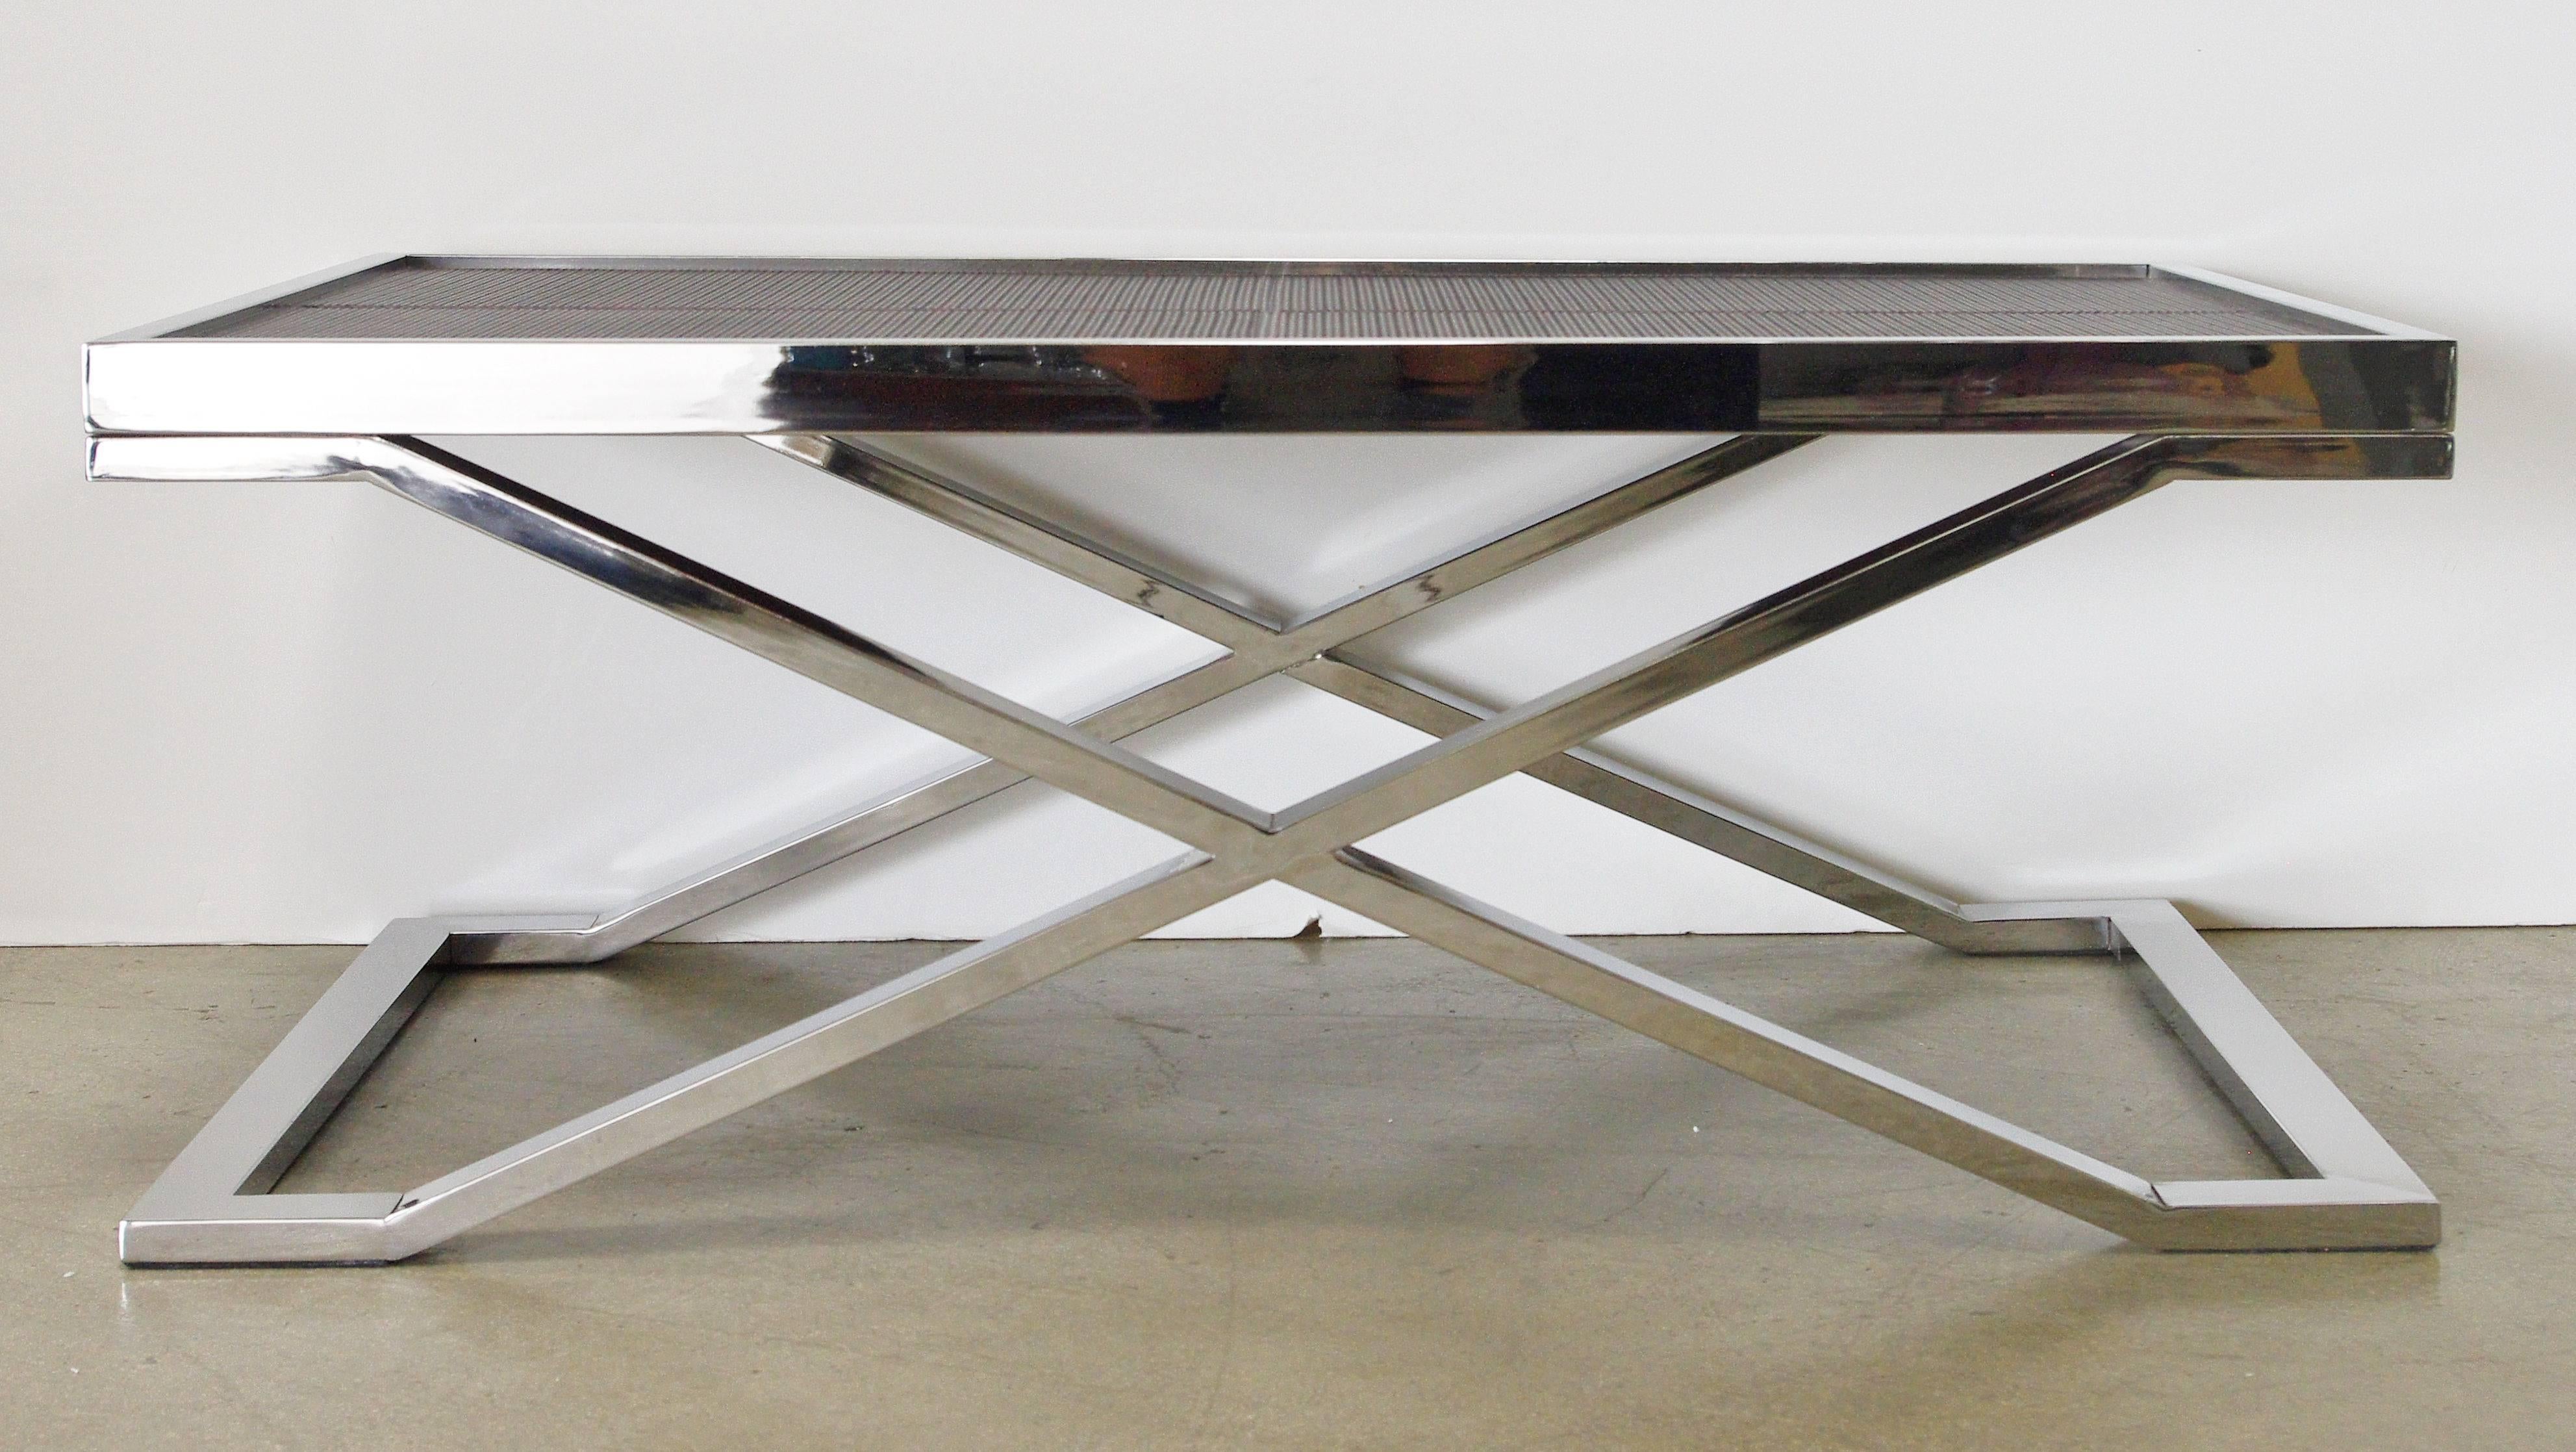 Stainless steel coffee table with dark brown leather with pressed braided effect designed by Fabio Bergomi / Made in Italy
Depth: 24 inches / Width: 39.5 inches / Height: 16 inches 
1 in stock in Palm Springs ON FINAL CLEARANCE SALE for